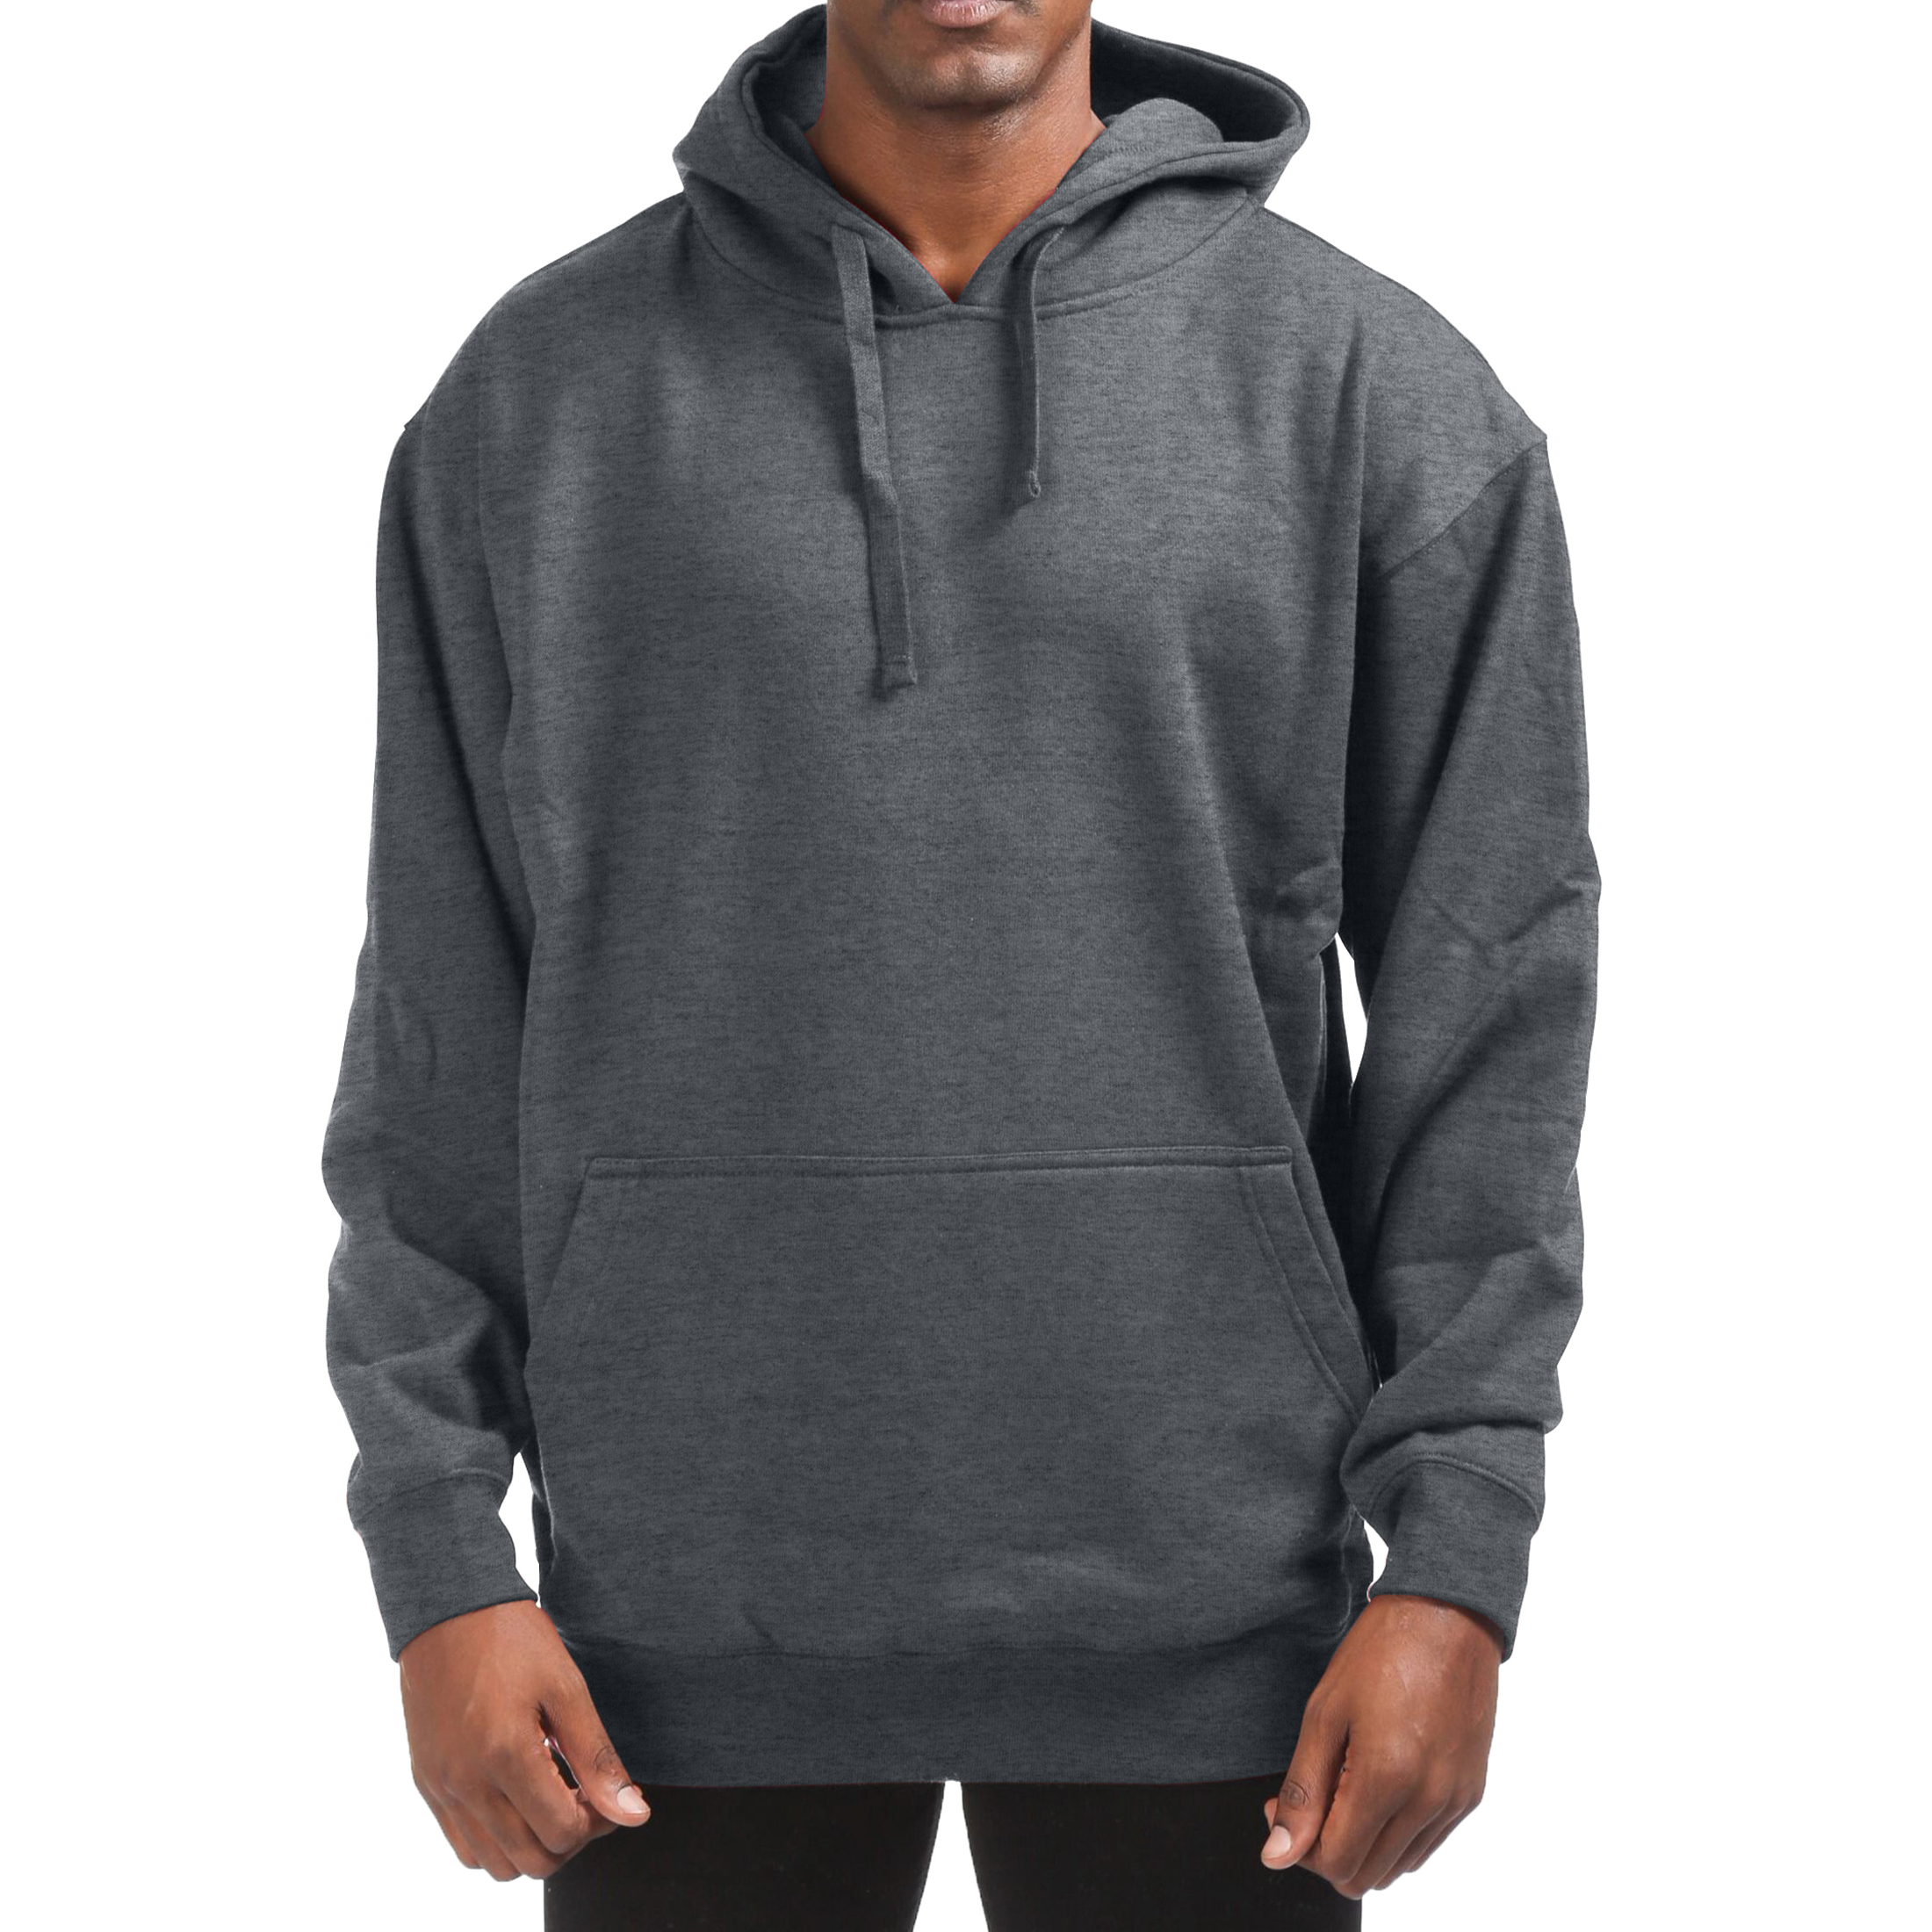 Men's Cotton-Blend Fleece Pullover Hoodie With Pocket (Big & Tall Sizes Available) - Charcoal, 4X-Large